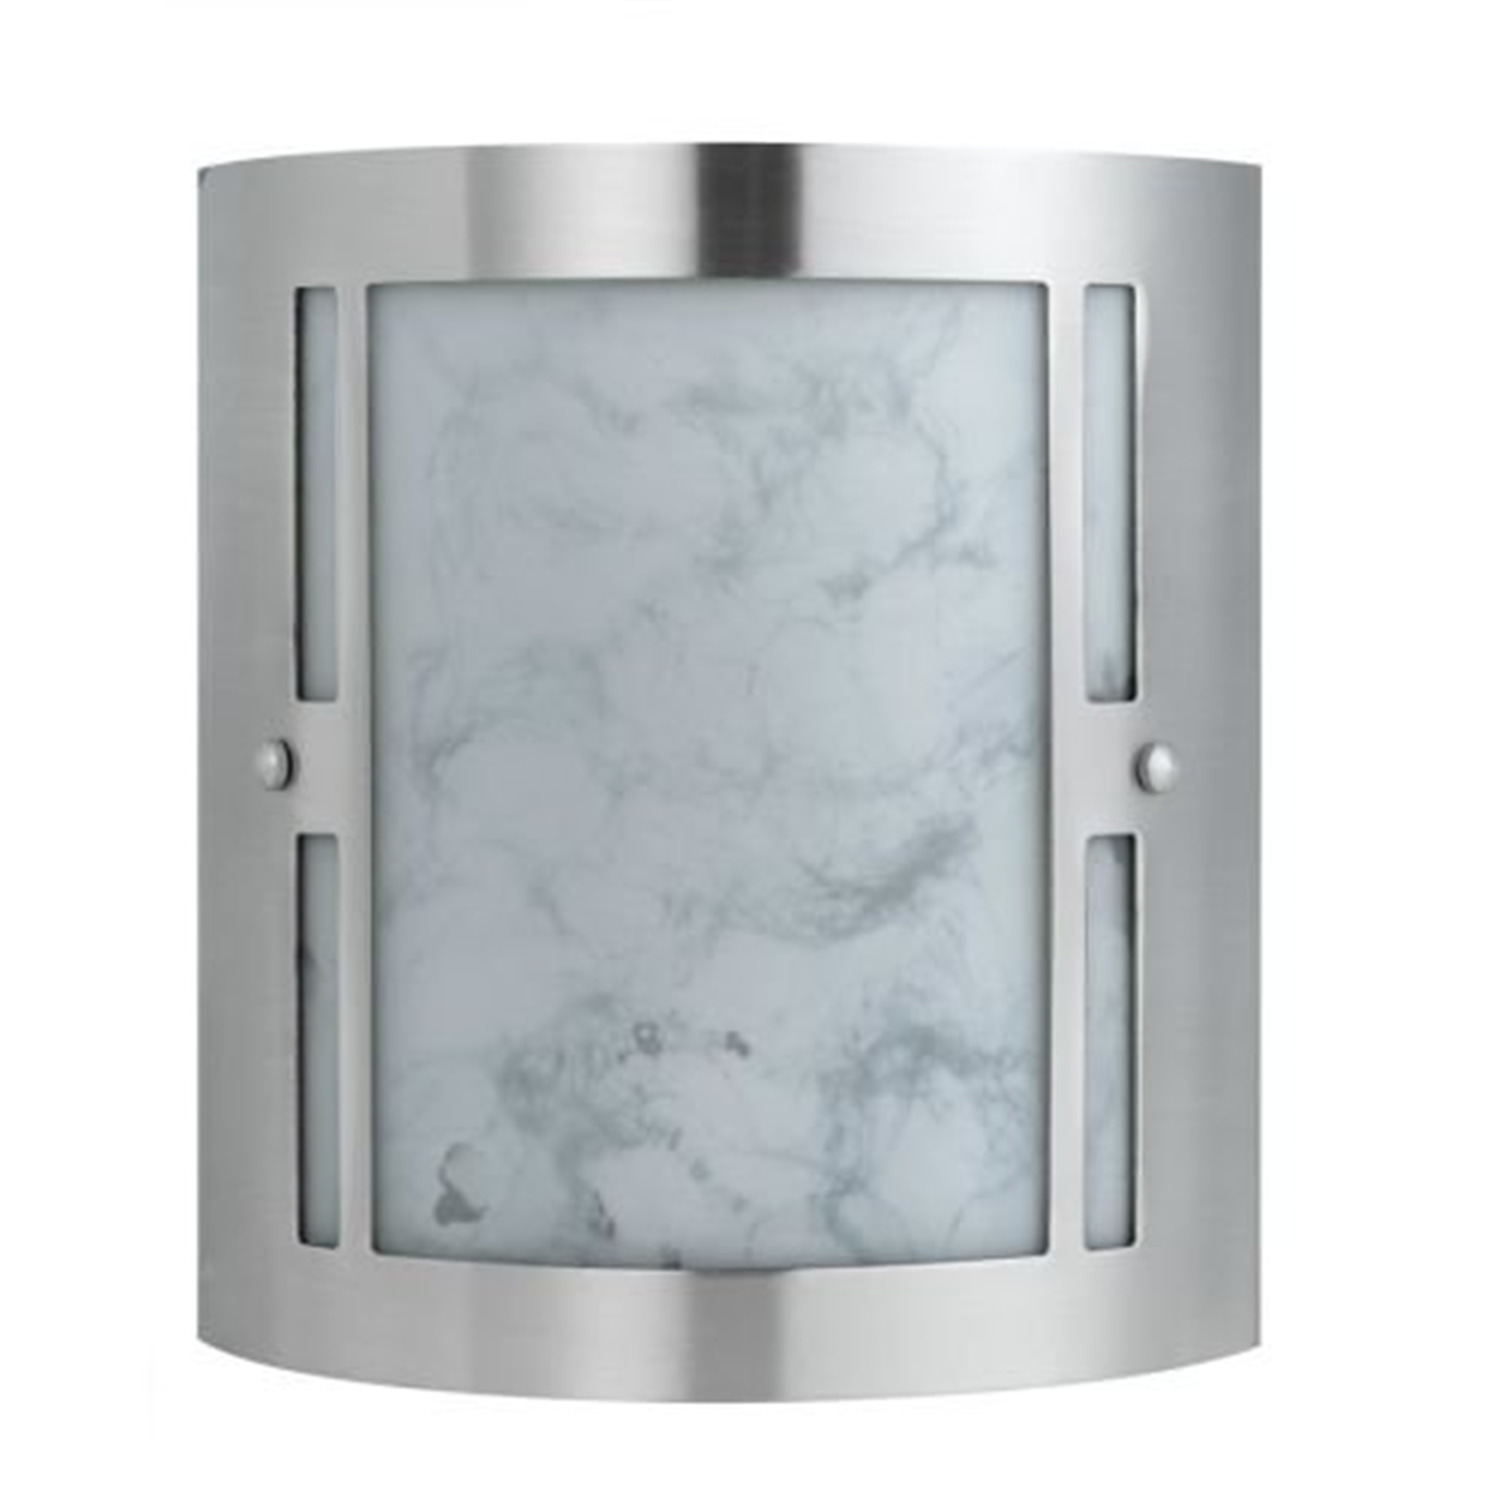 11" Height Vanity Light in Brushed Steel-Color:Brushed Steel,Finish:Brushed Steel,Style:Hotel,Wattage:26WX2 - image 1 of 2